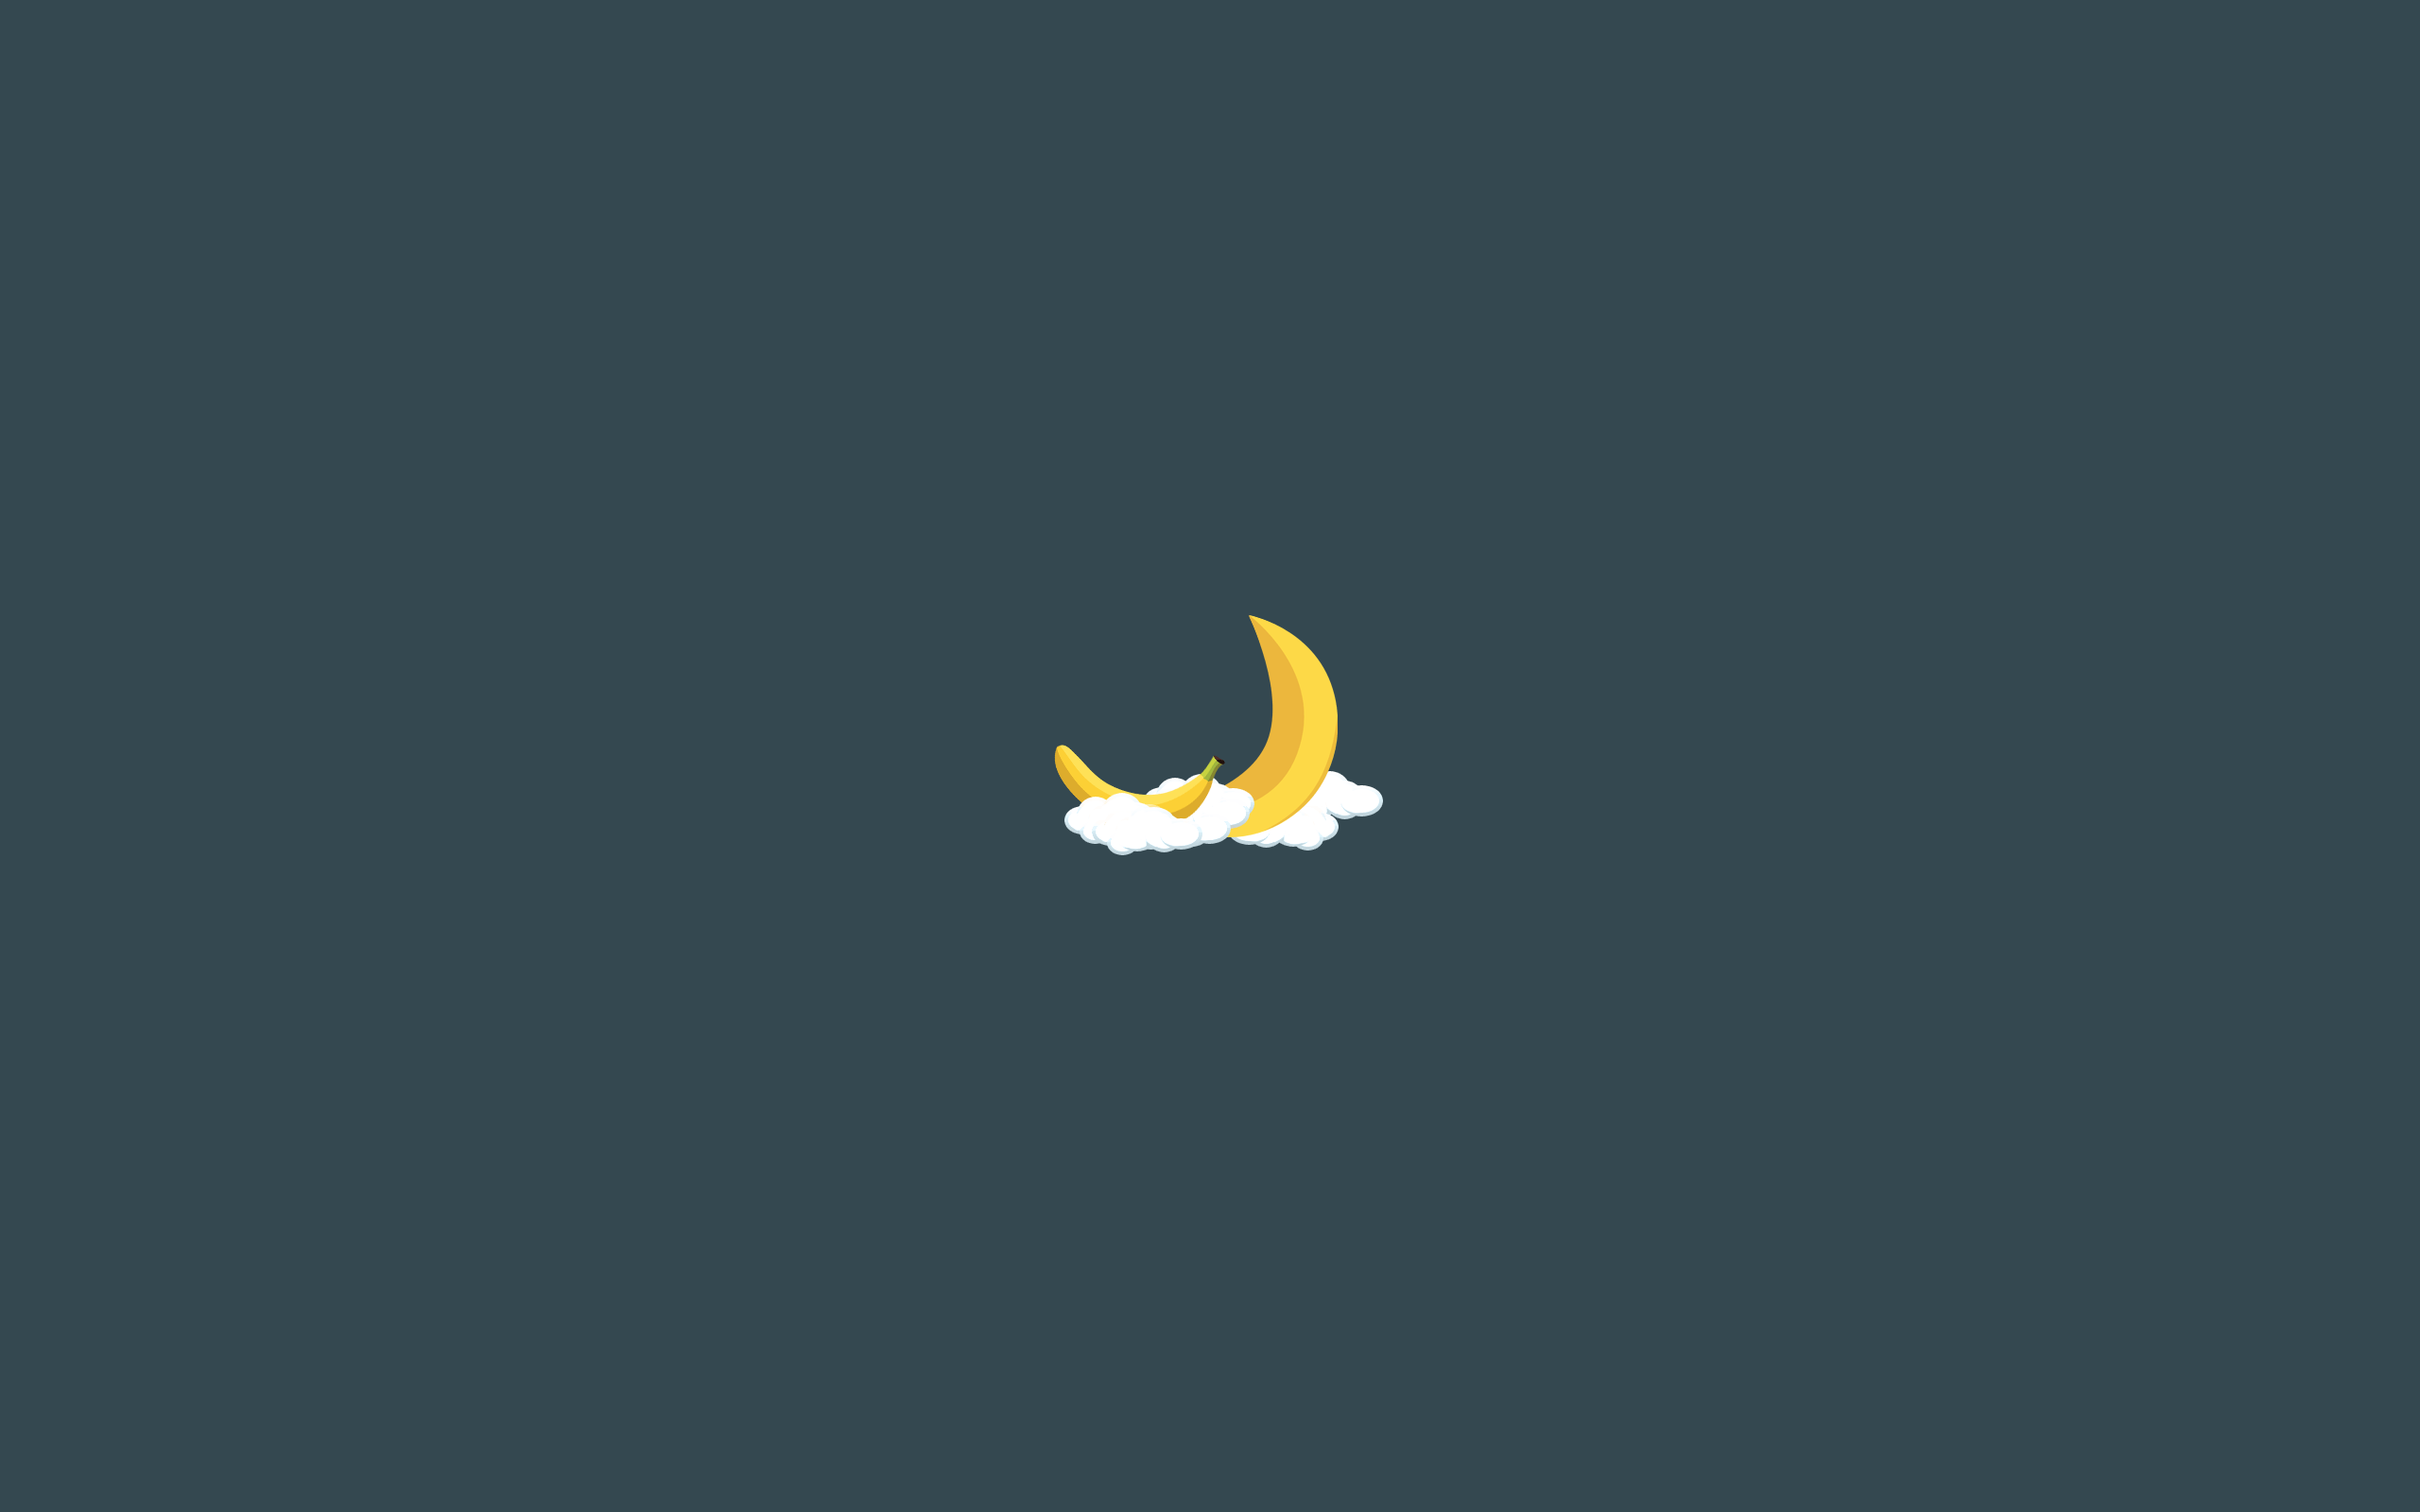 clouds, Moon, humor, bananas, minimalism, simple background, moon phases Gallery HD Wallpaper